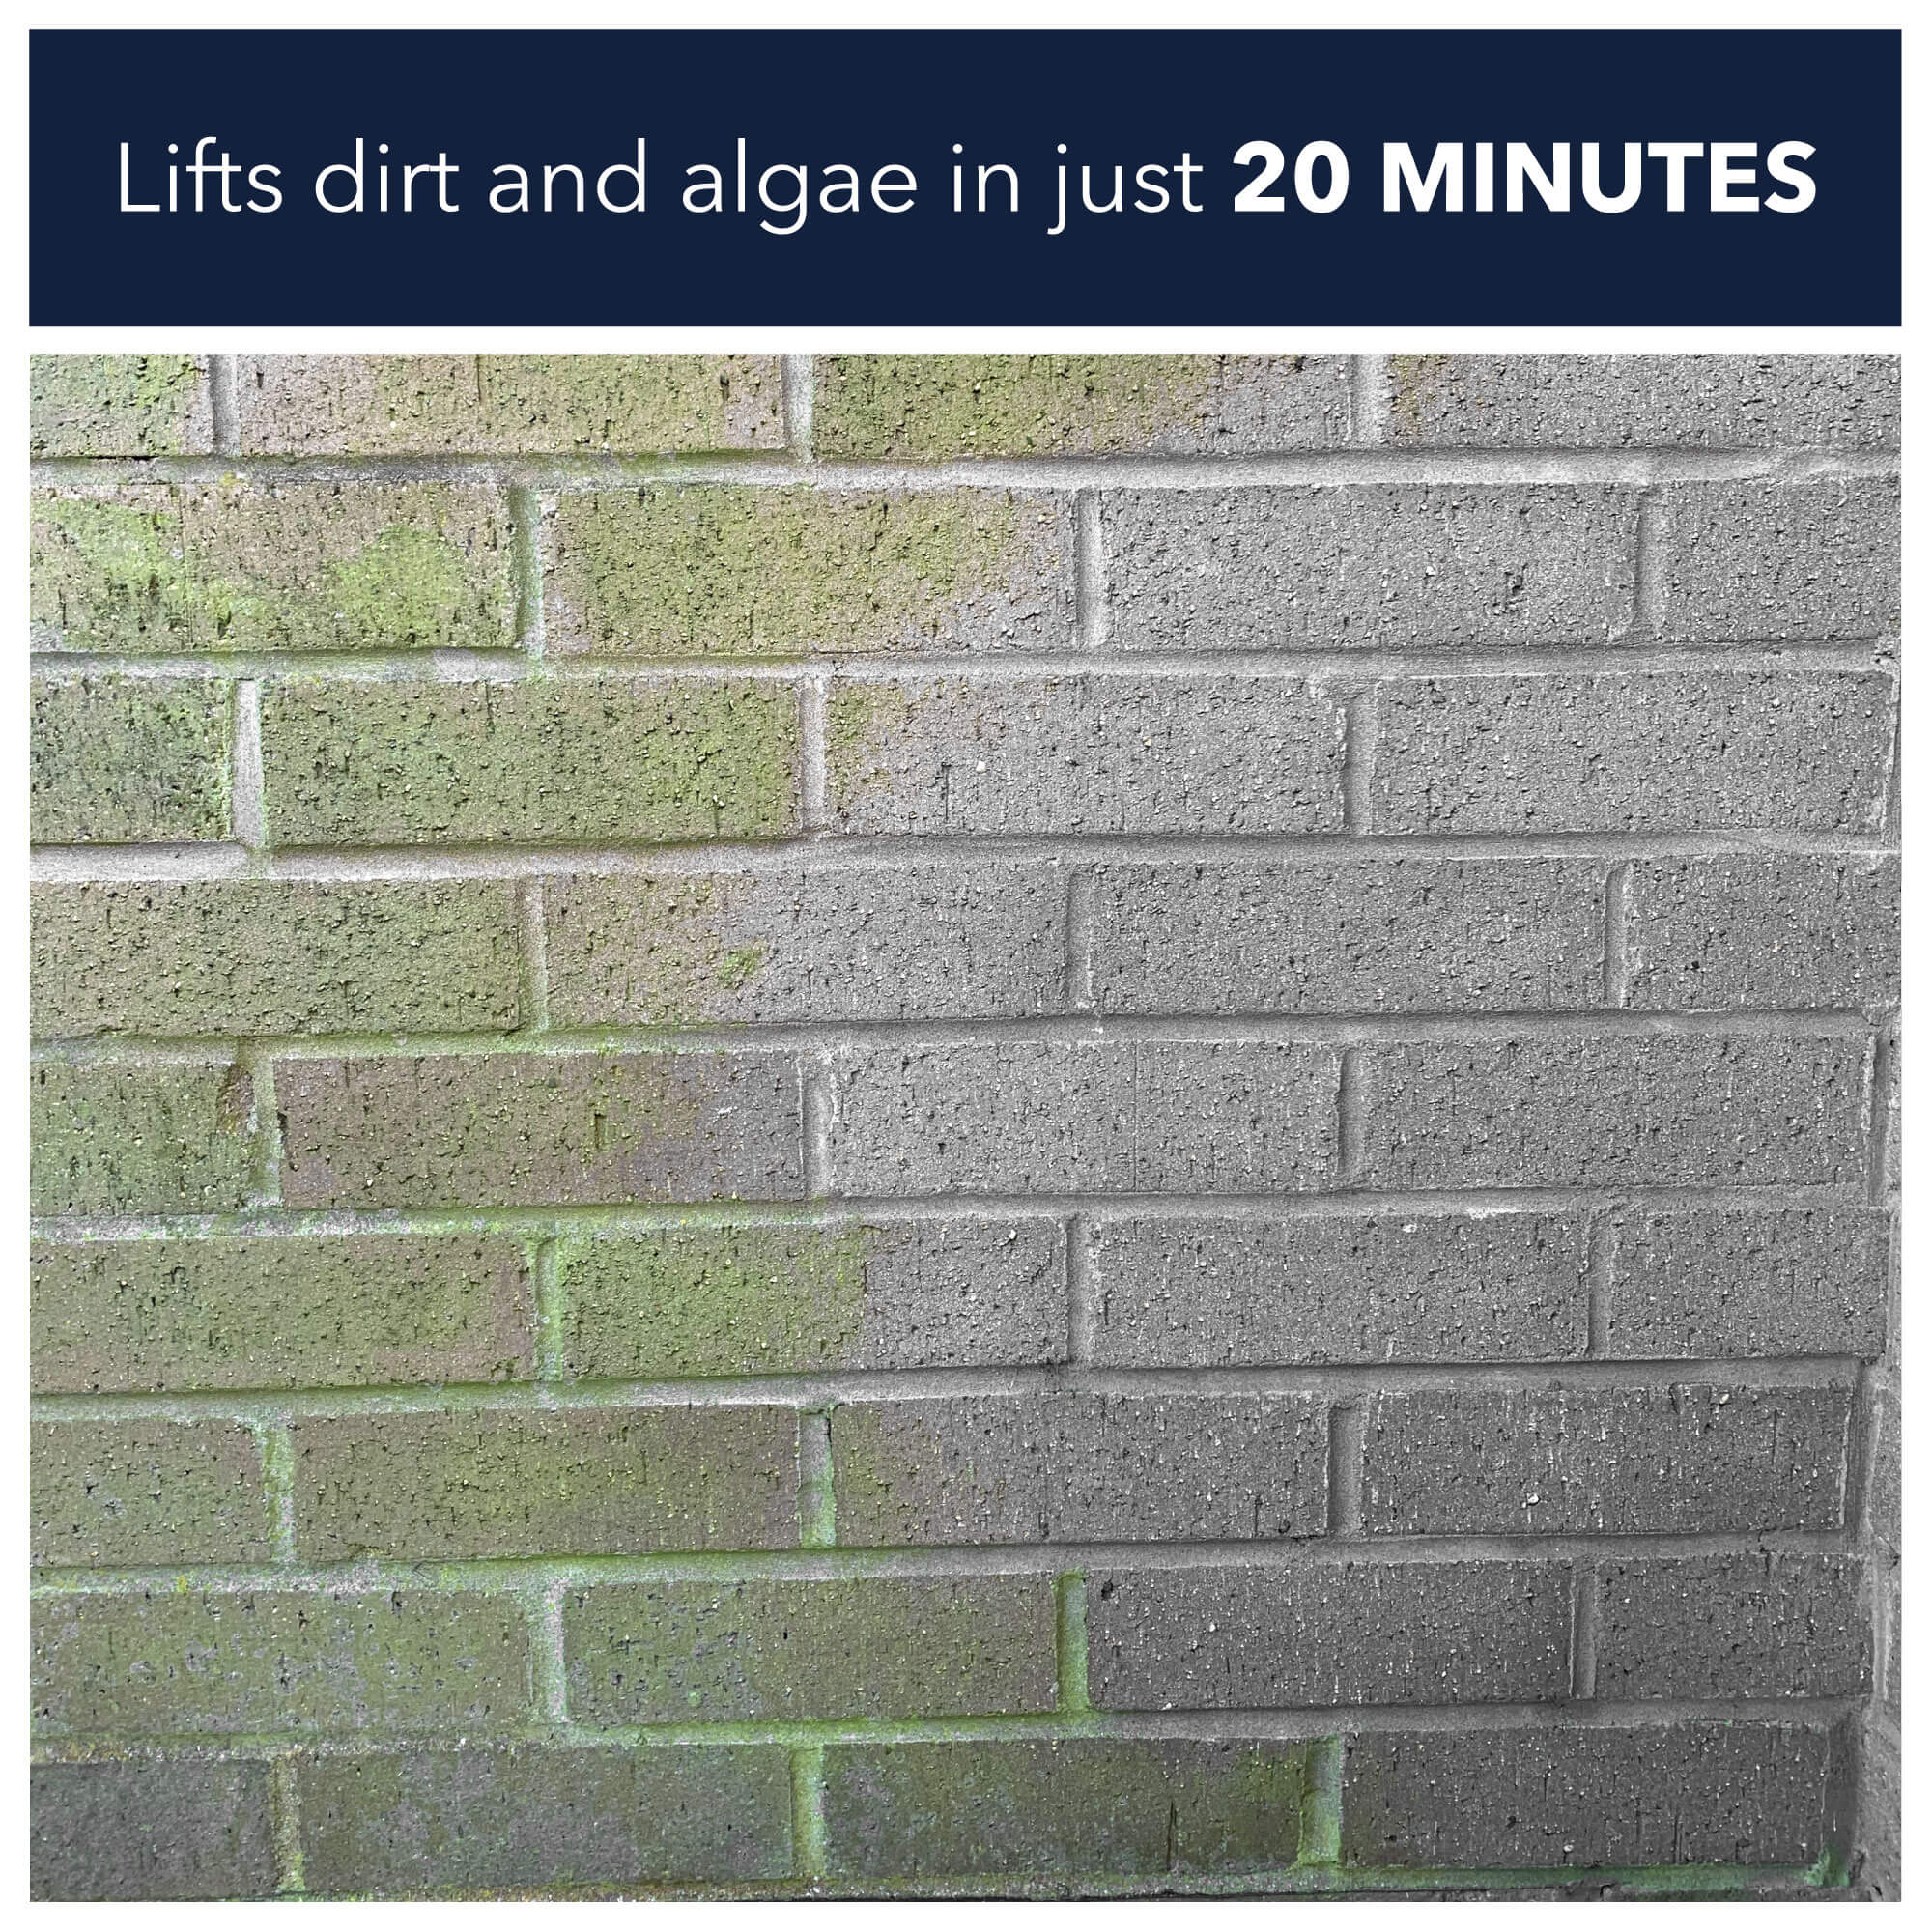 Lifts dirt and grime in just 20 minutes